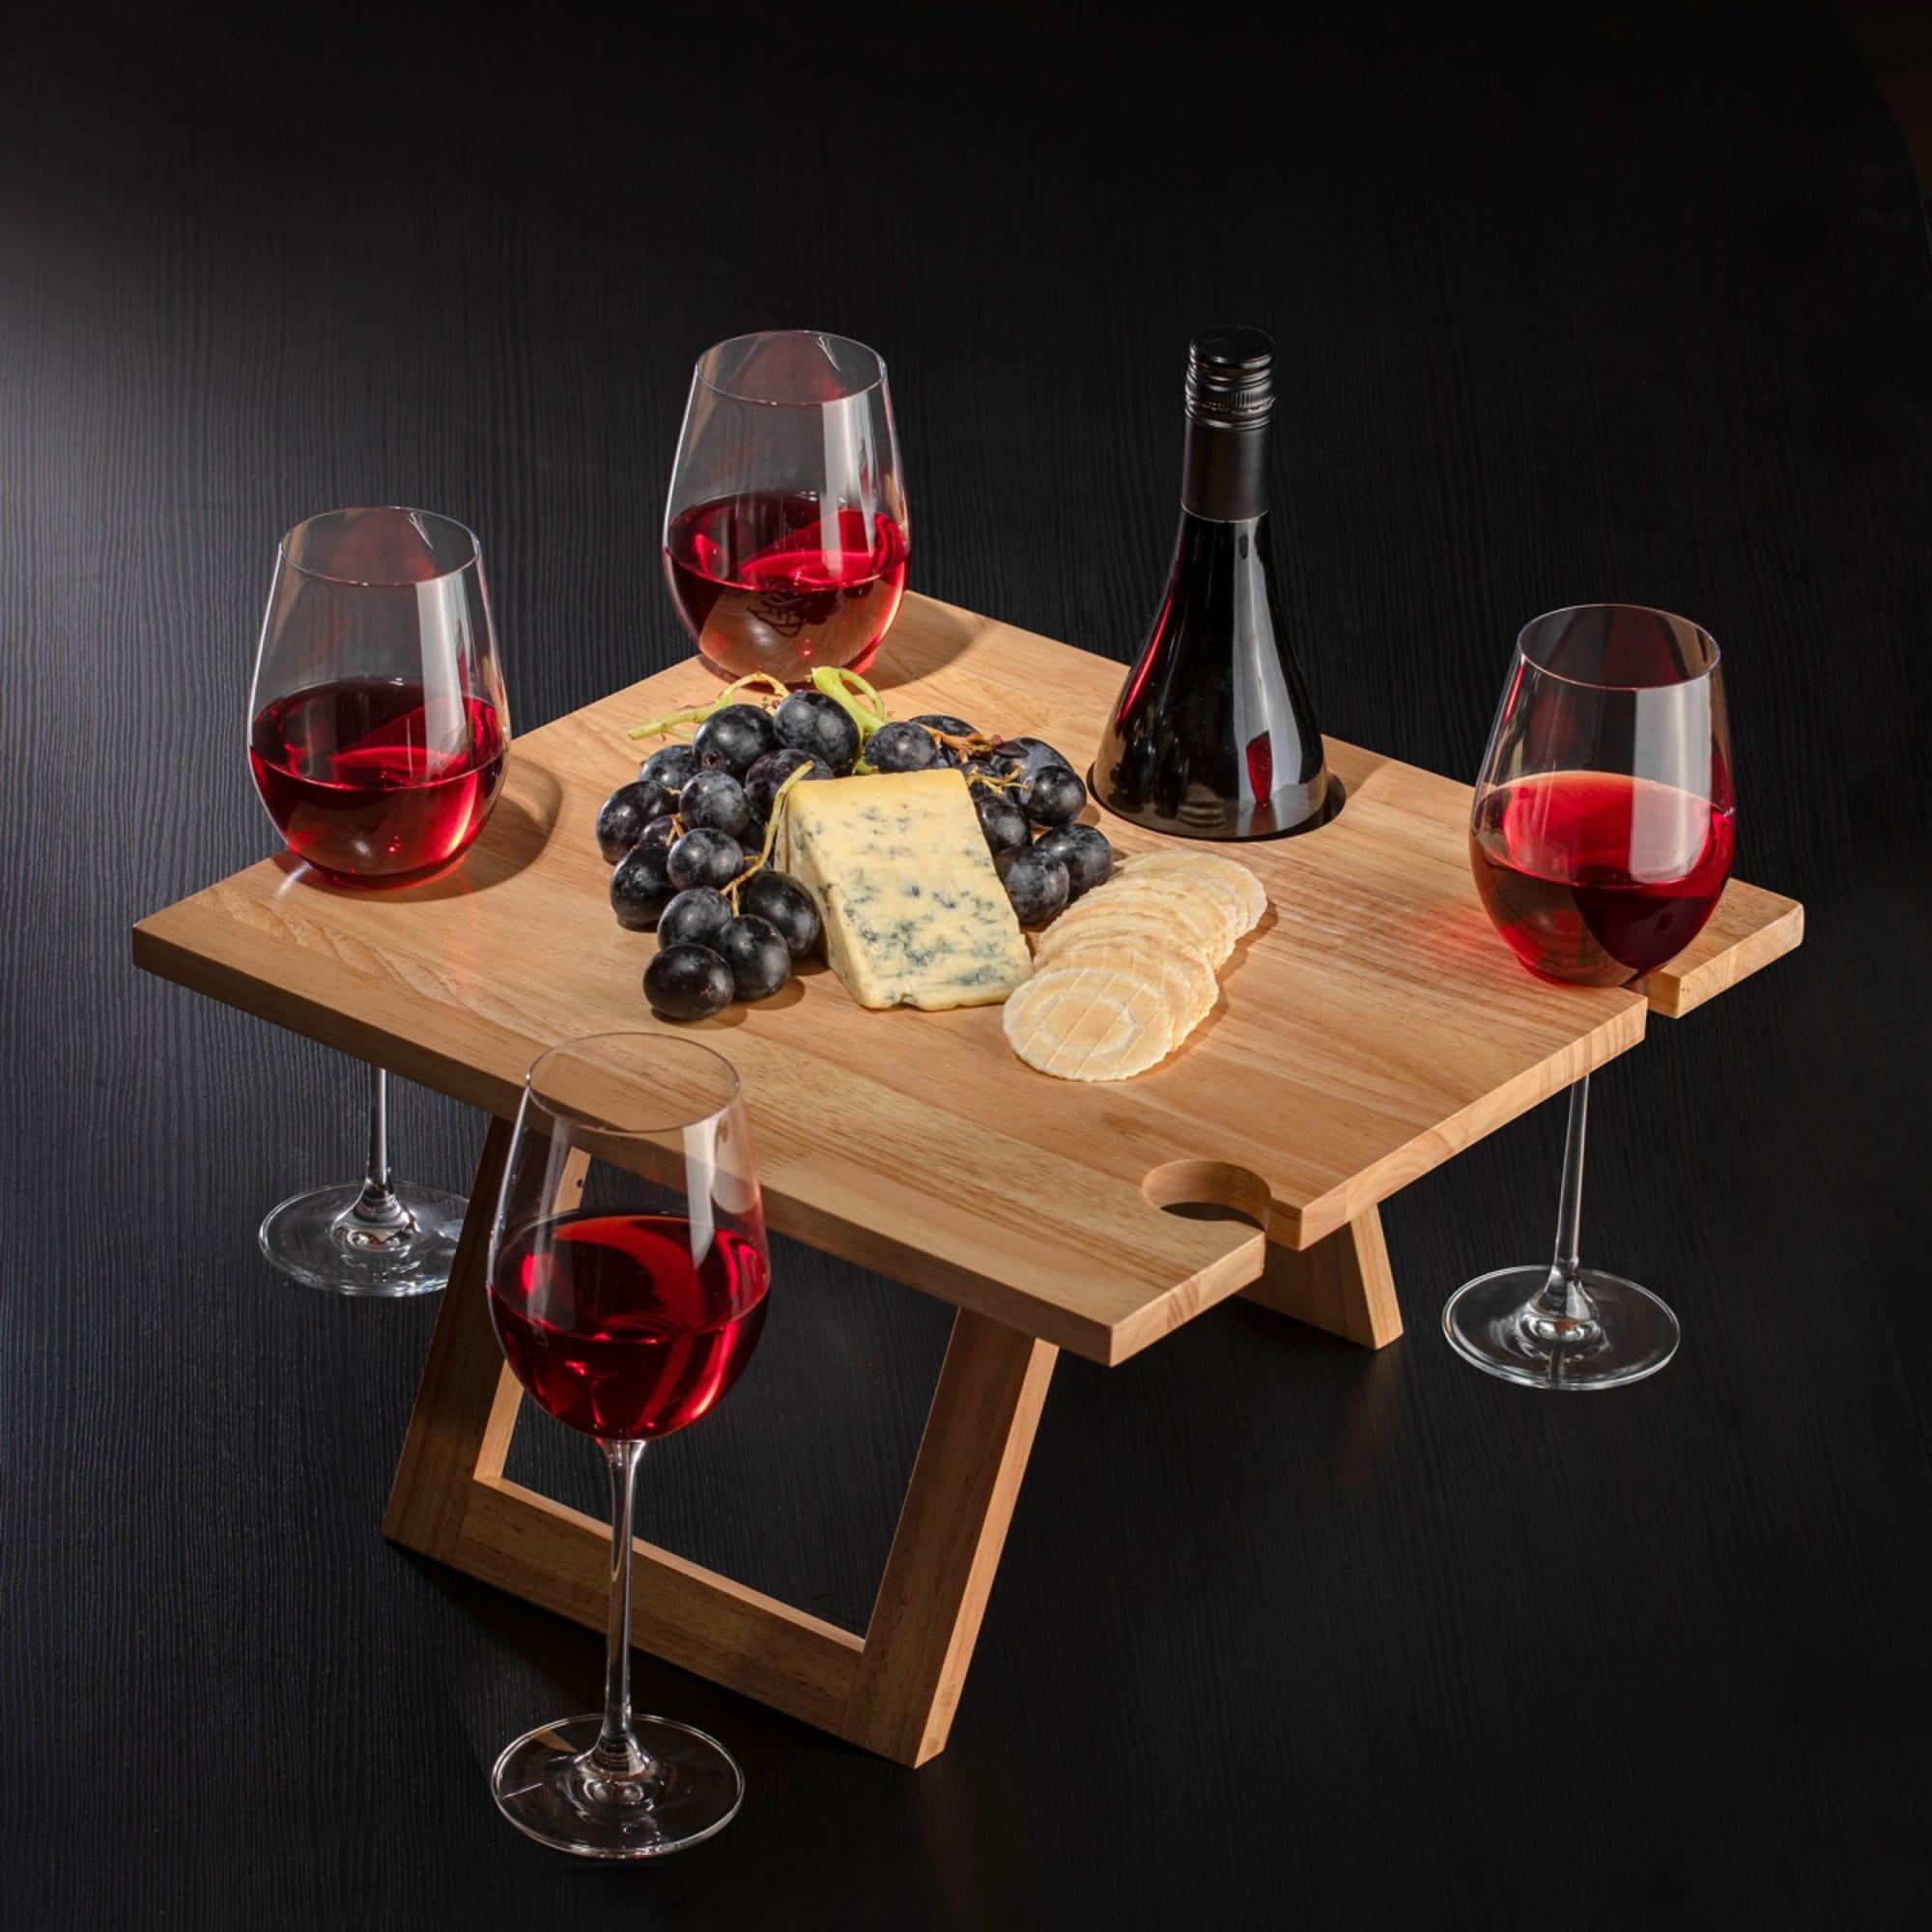 Tempa Fromagerie Square Collapsible Picnic Table Image 2